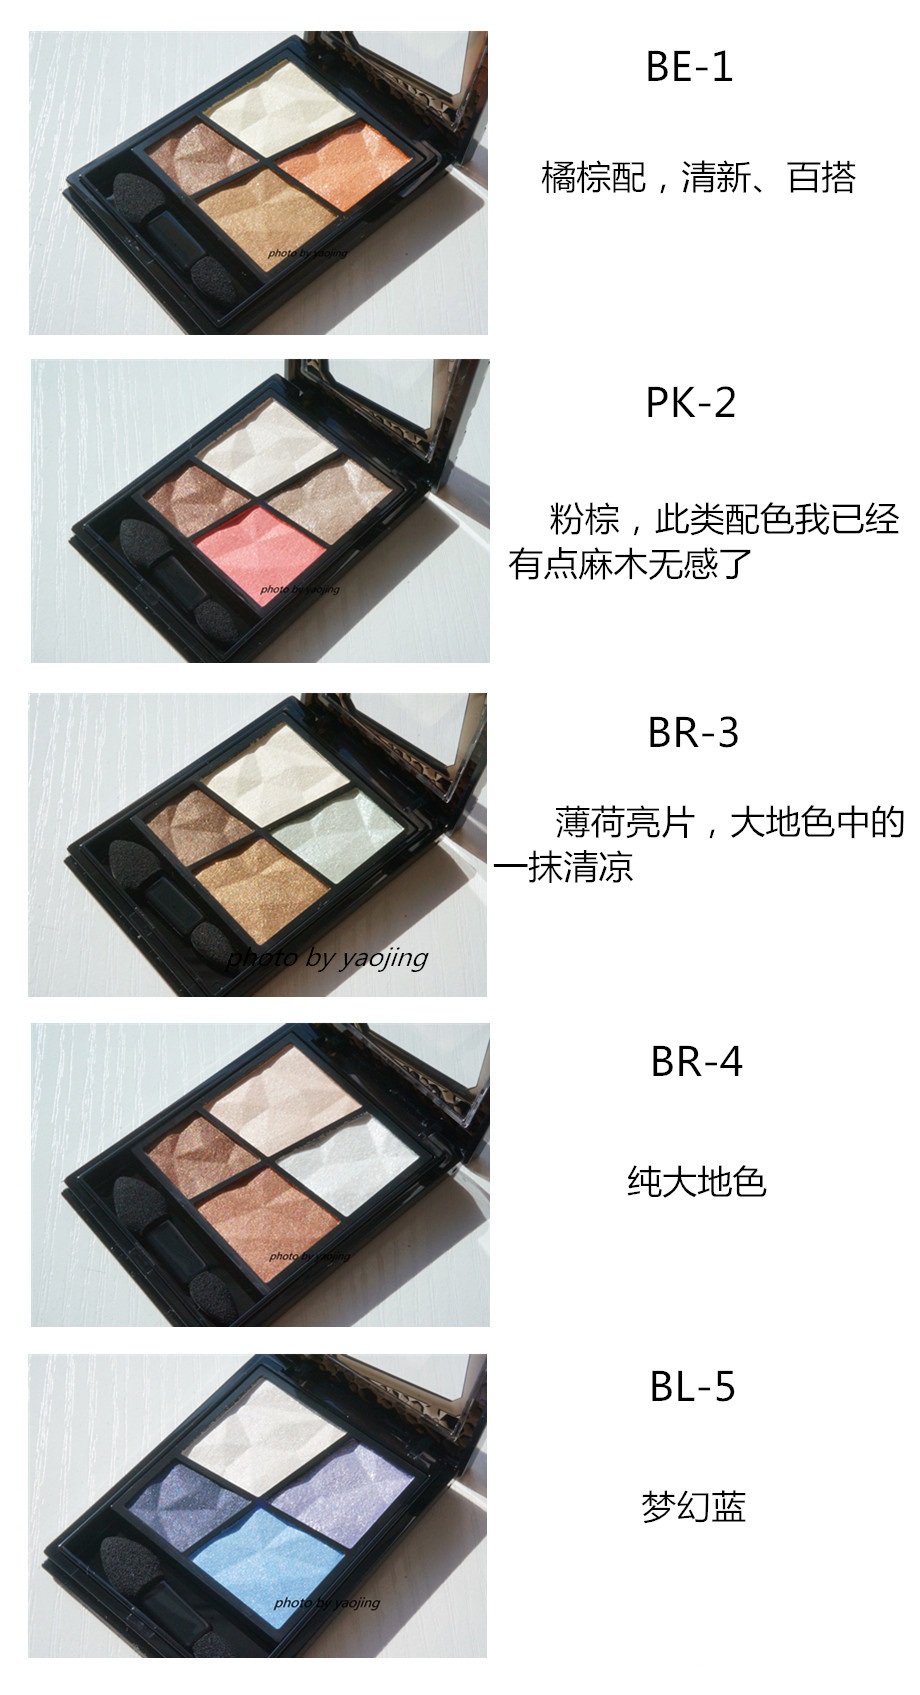 VISEE2017钻石四色眼影BE-1、PK-2、BR-3、BR-4、BL-5试色+画法教程